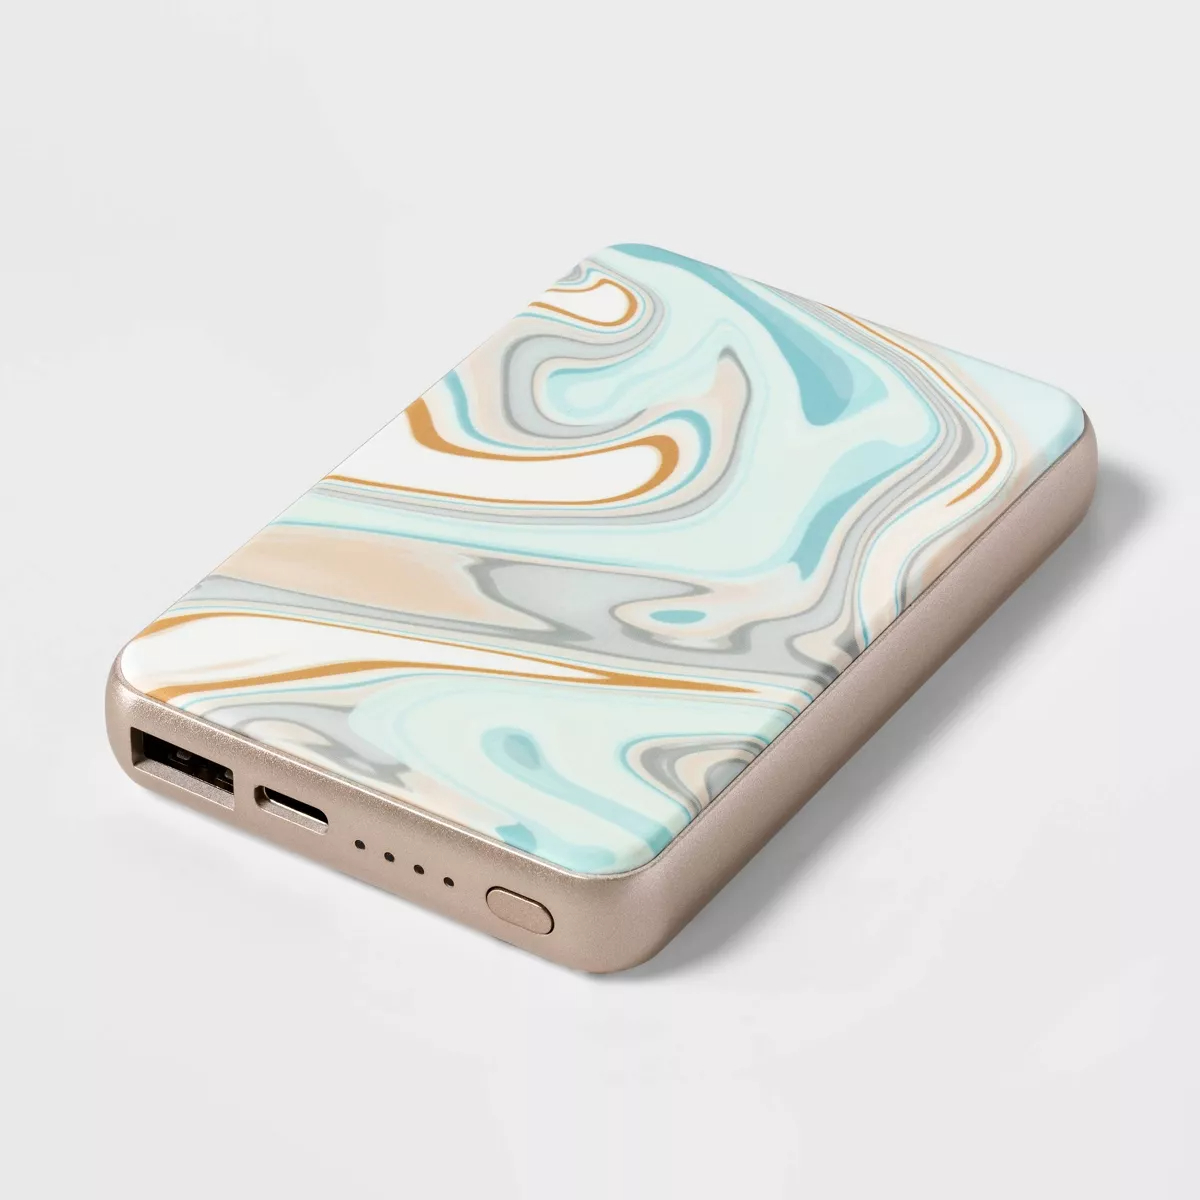 the power bank with a marbled design